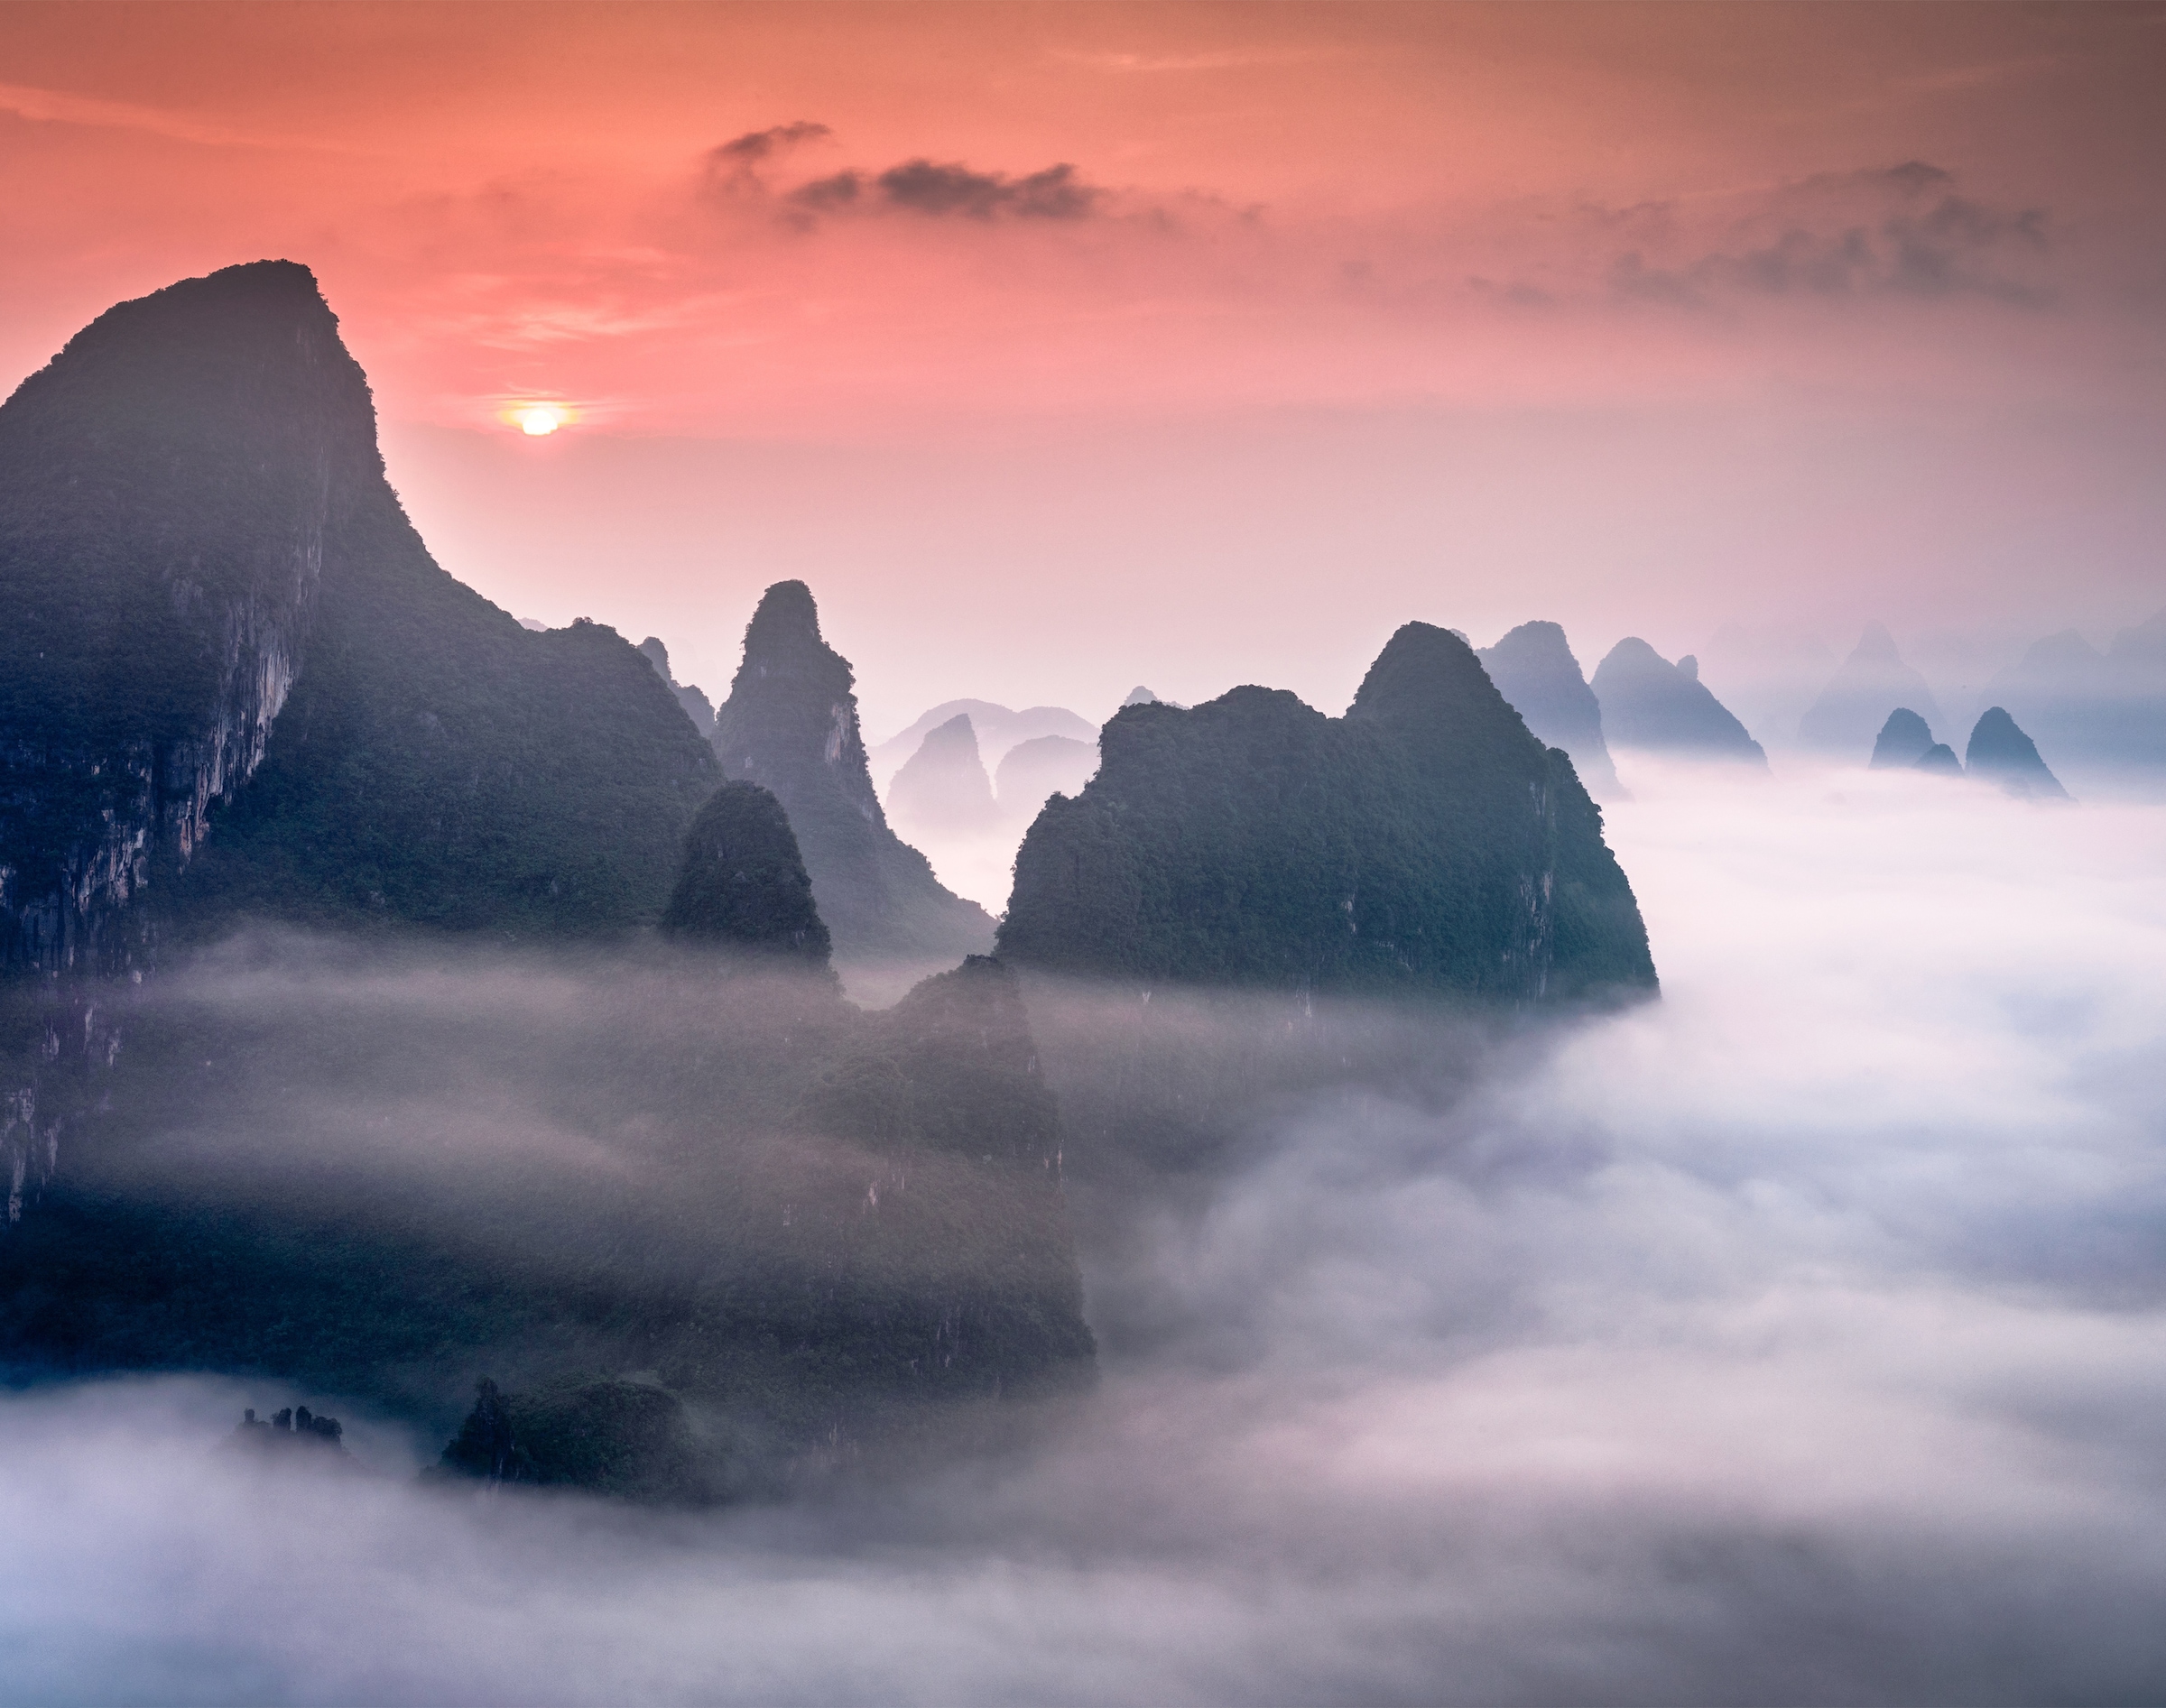 Papermoon Fototapete "Karst Mountains in Guilin China"